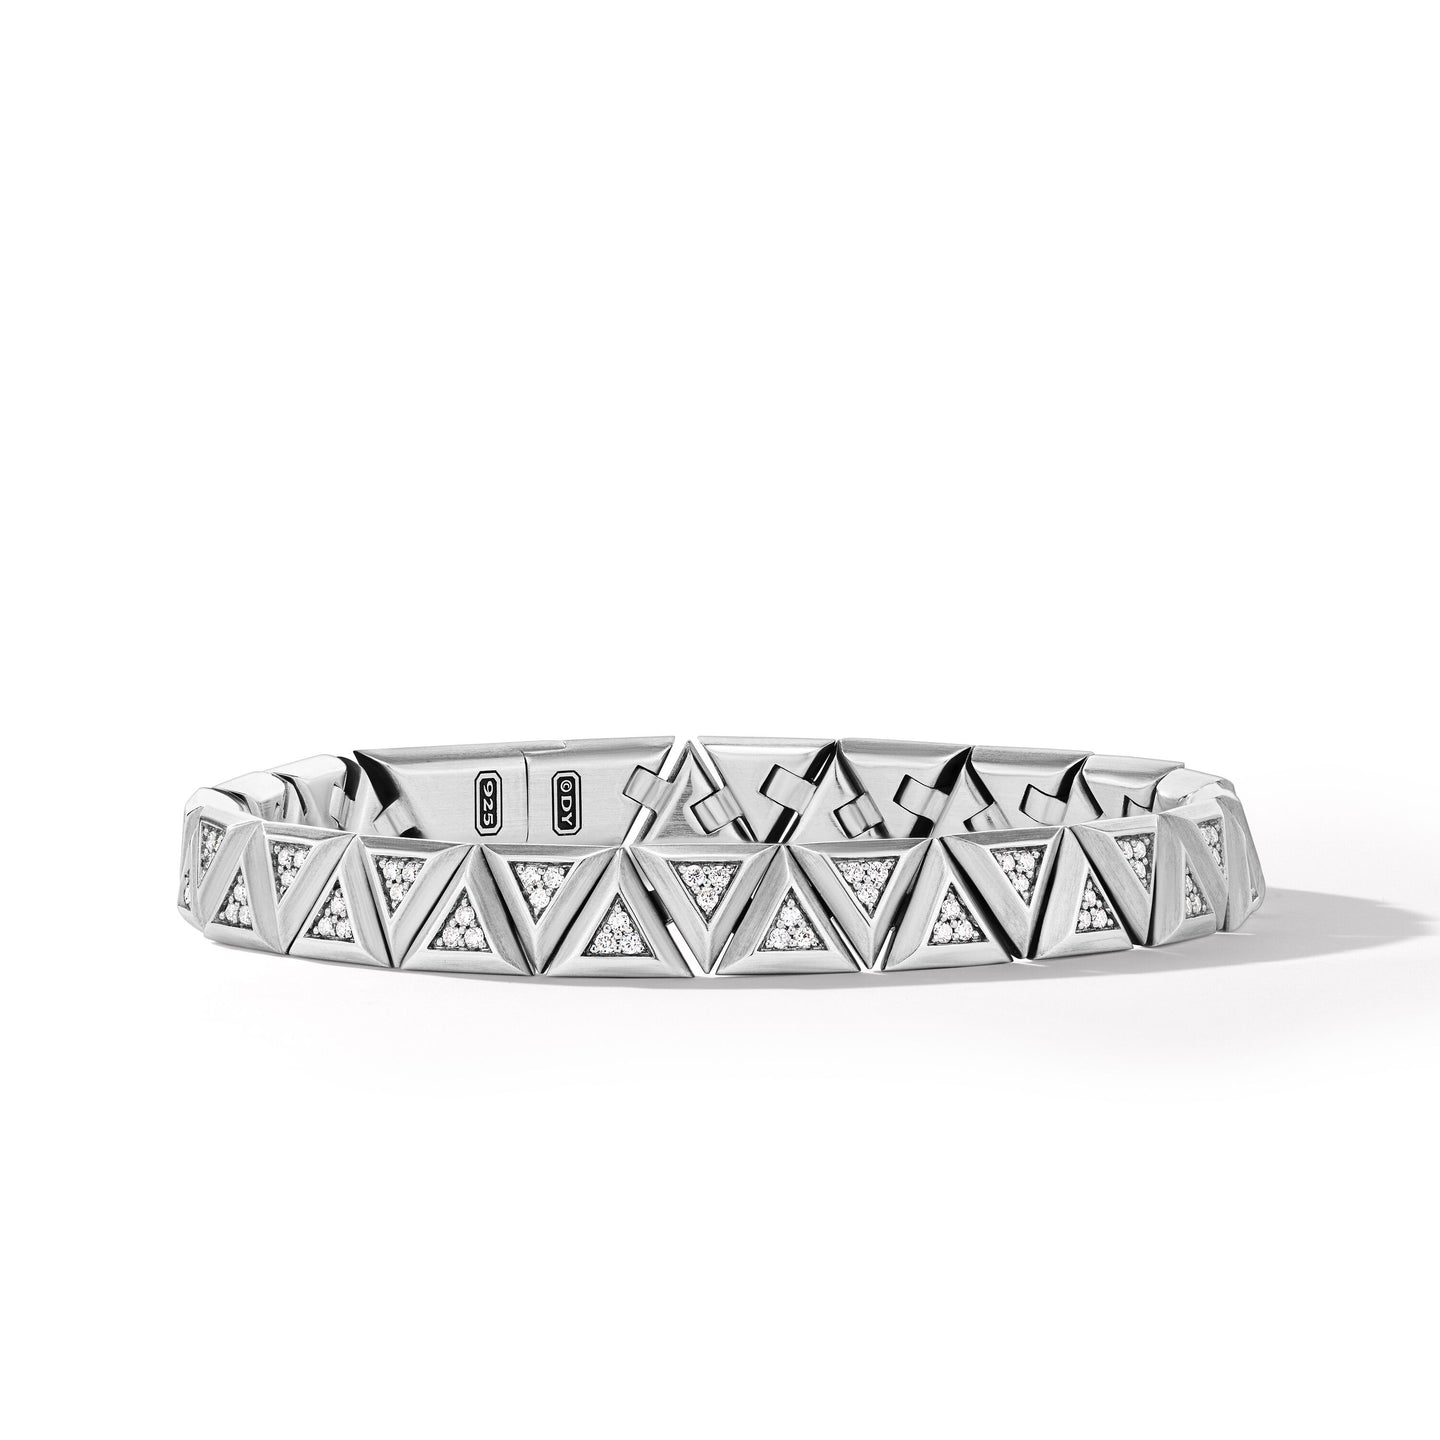 Faceted Link Triangle Bracelet in Sterling Silver with Diamonds, Size Medium